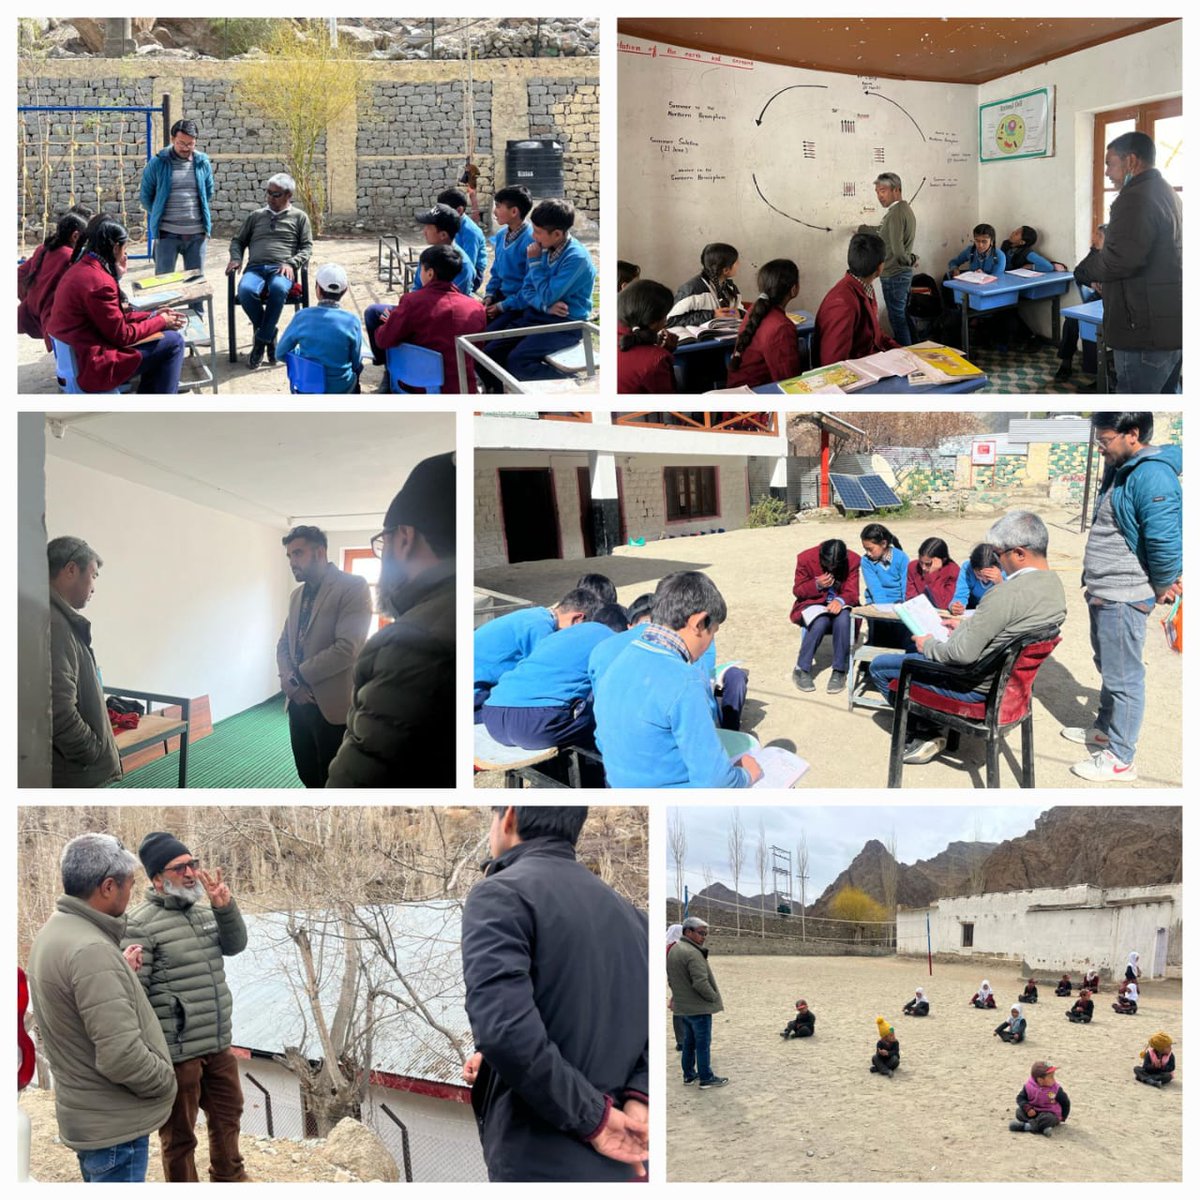 @dse_ladakh also visited MS Dha, MS Darchiks, MS Batalik, and HSS Silmo, engaging with students and discussed their learning outcomes. He also visited hostel #NSCBAV Silmo, instructed Principal to take necessary action in improvement of functioning of NSCBAV hostel @lg_ladakh